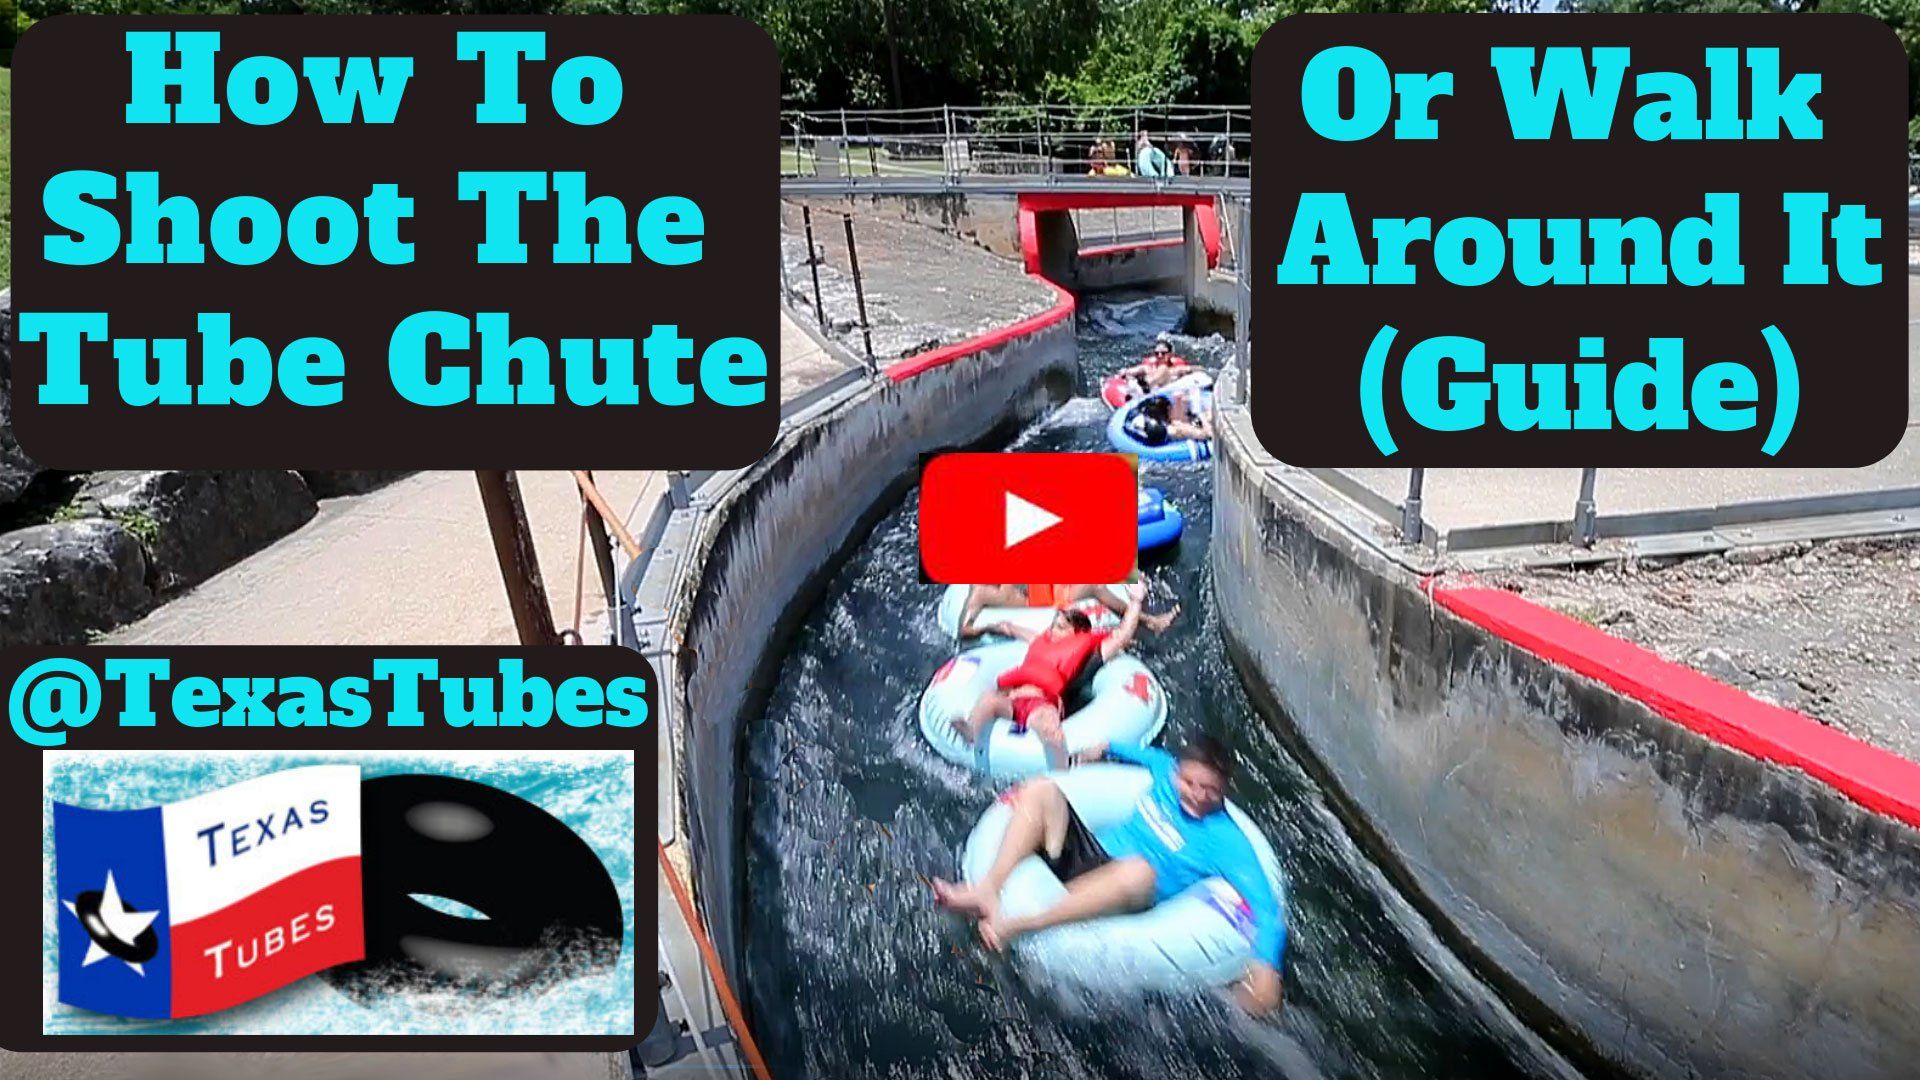 New Braunfels Tube Chute Video - How To Shoot The Tube Chute Or Walk Around It Guide